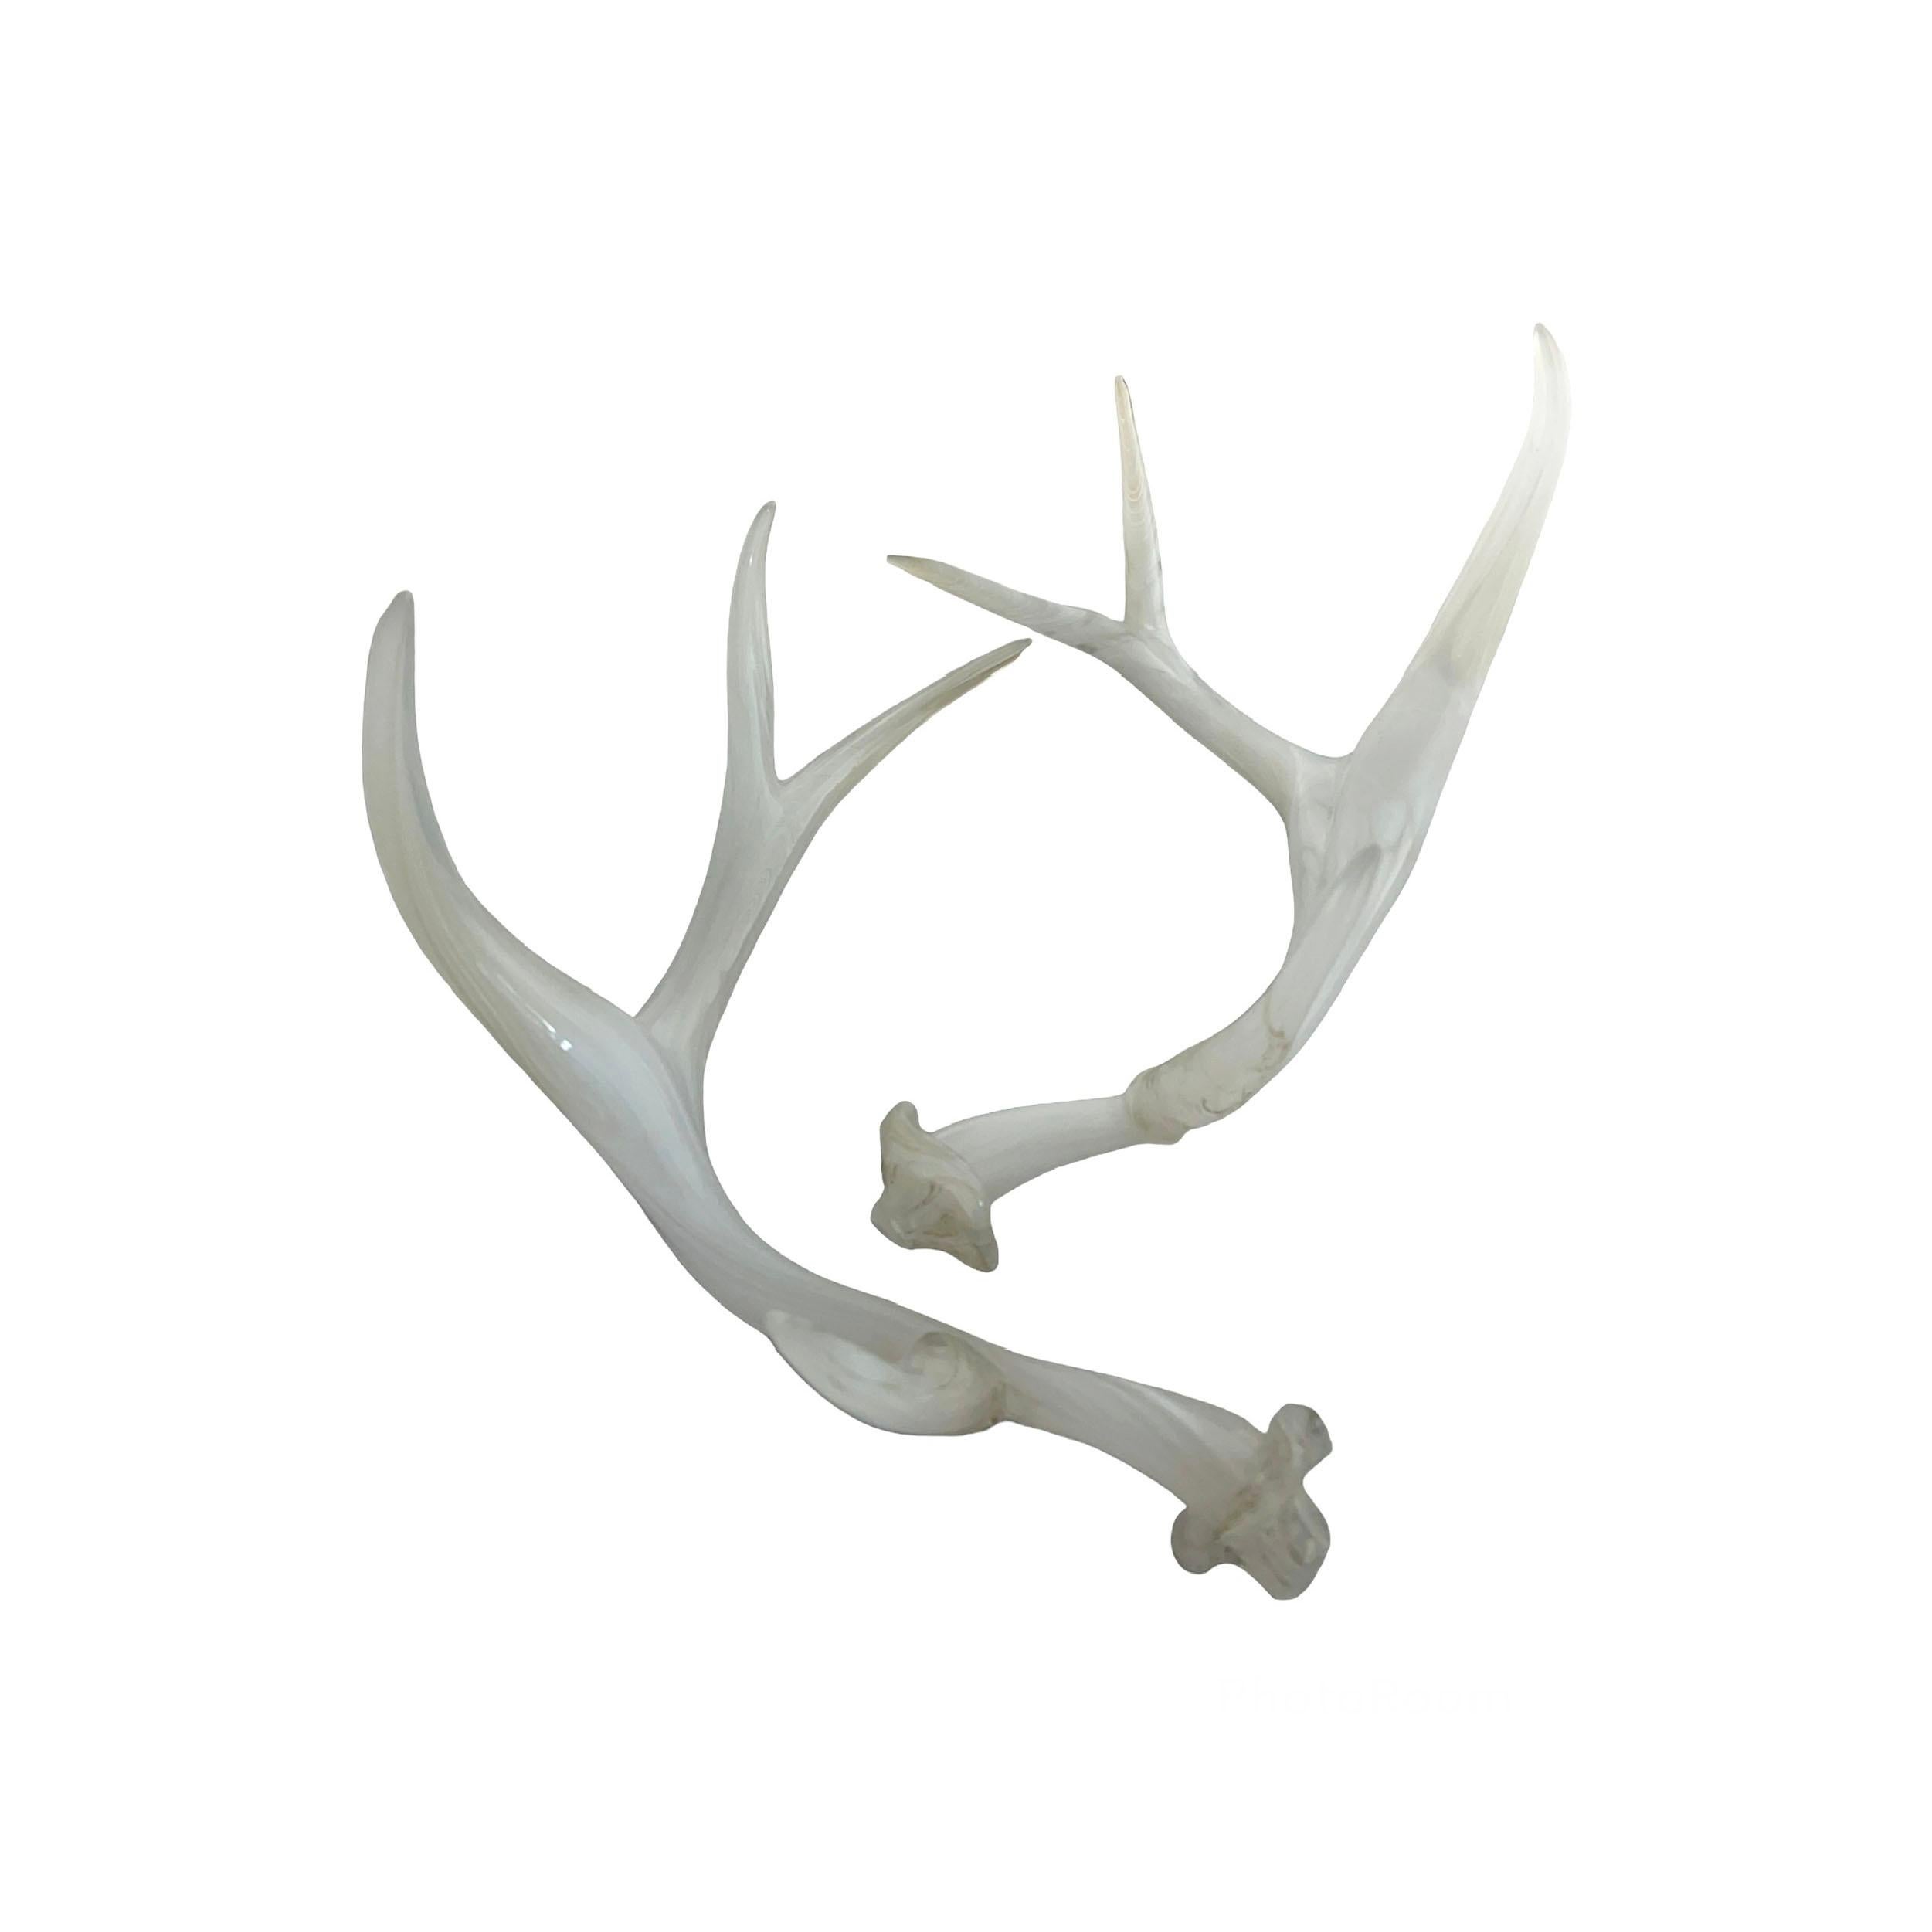 2023
Glass Antlers
Approximately 5